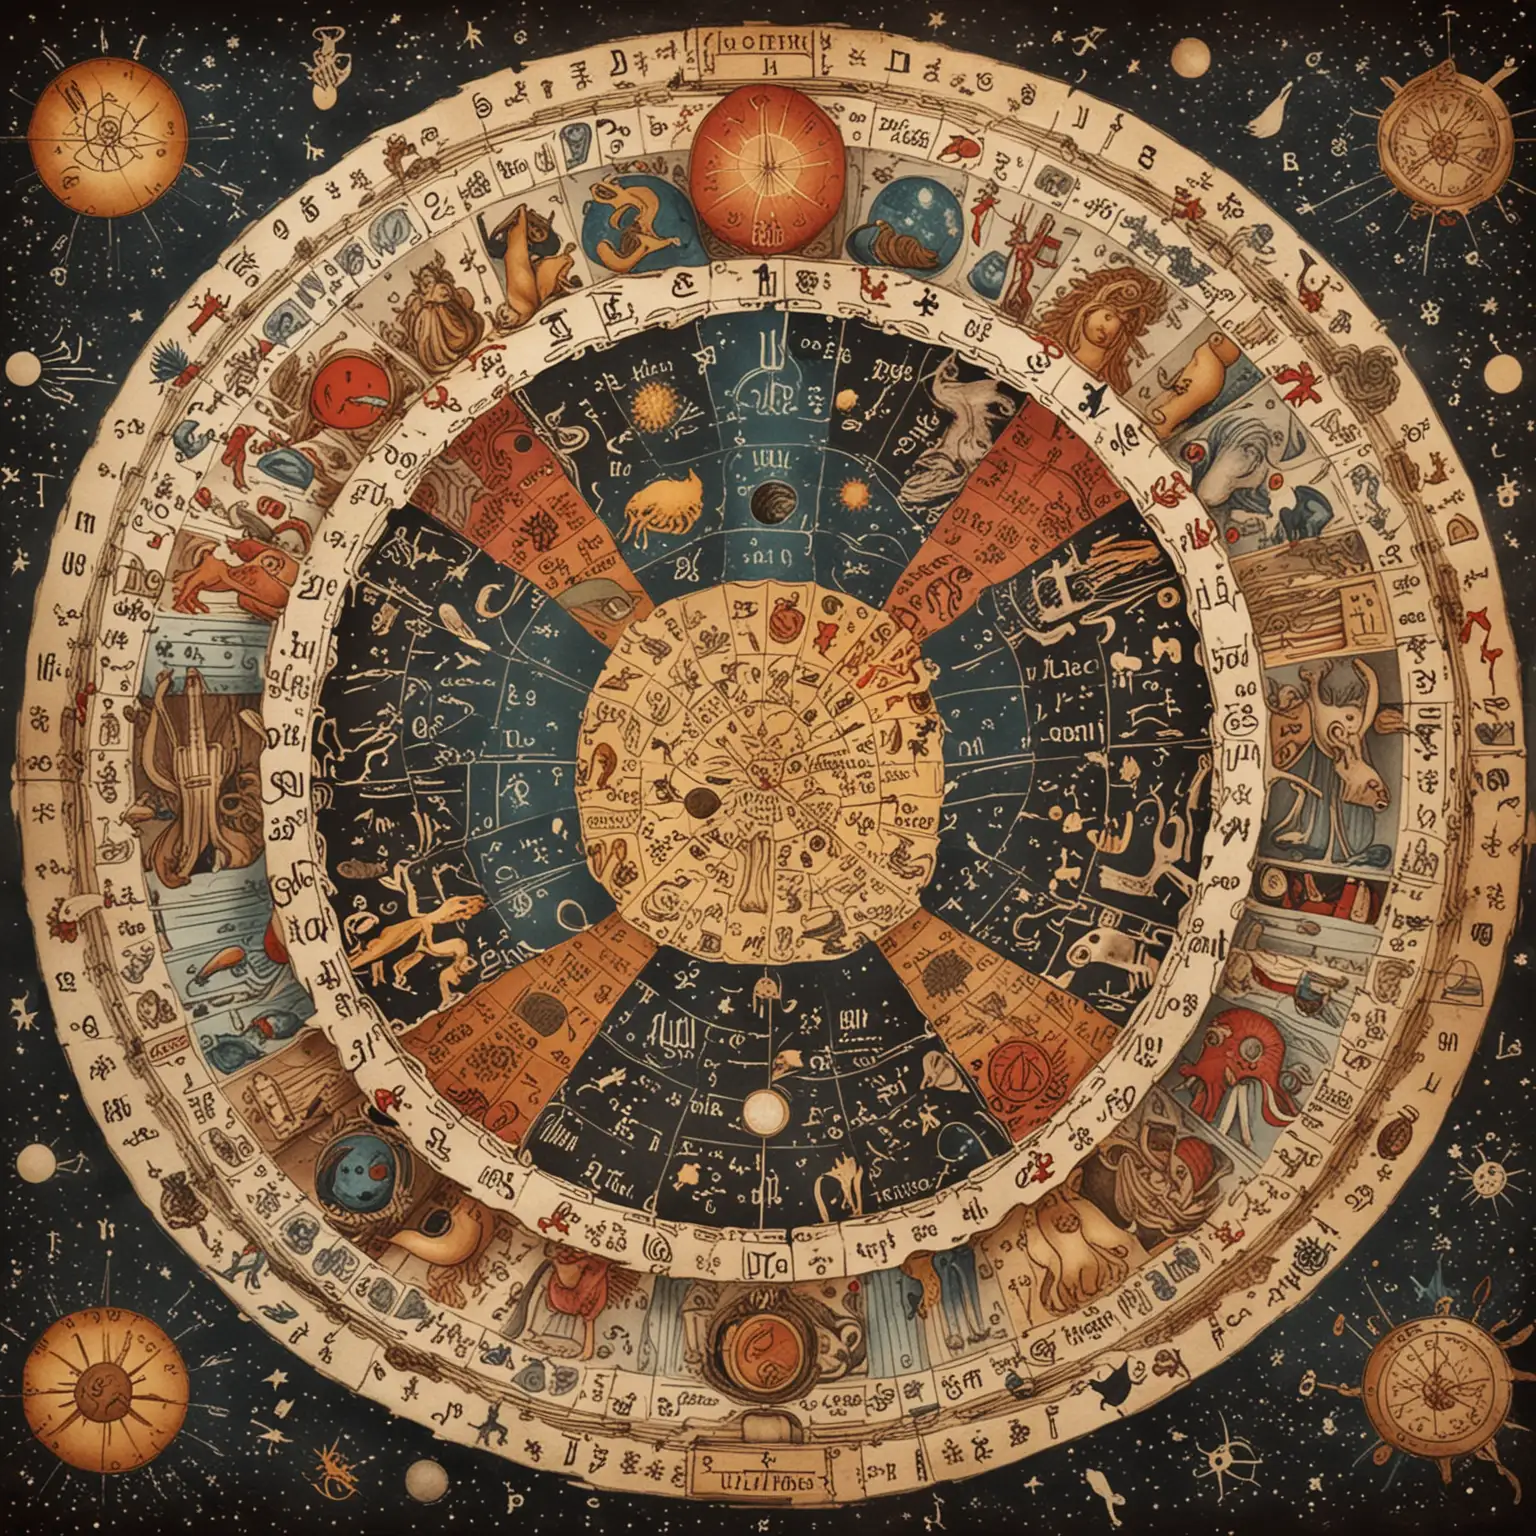 Cosmic Occult Wheel Diagram with Zodiac Signs